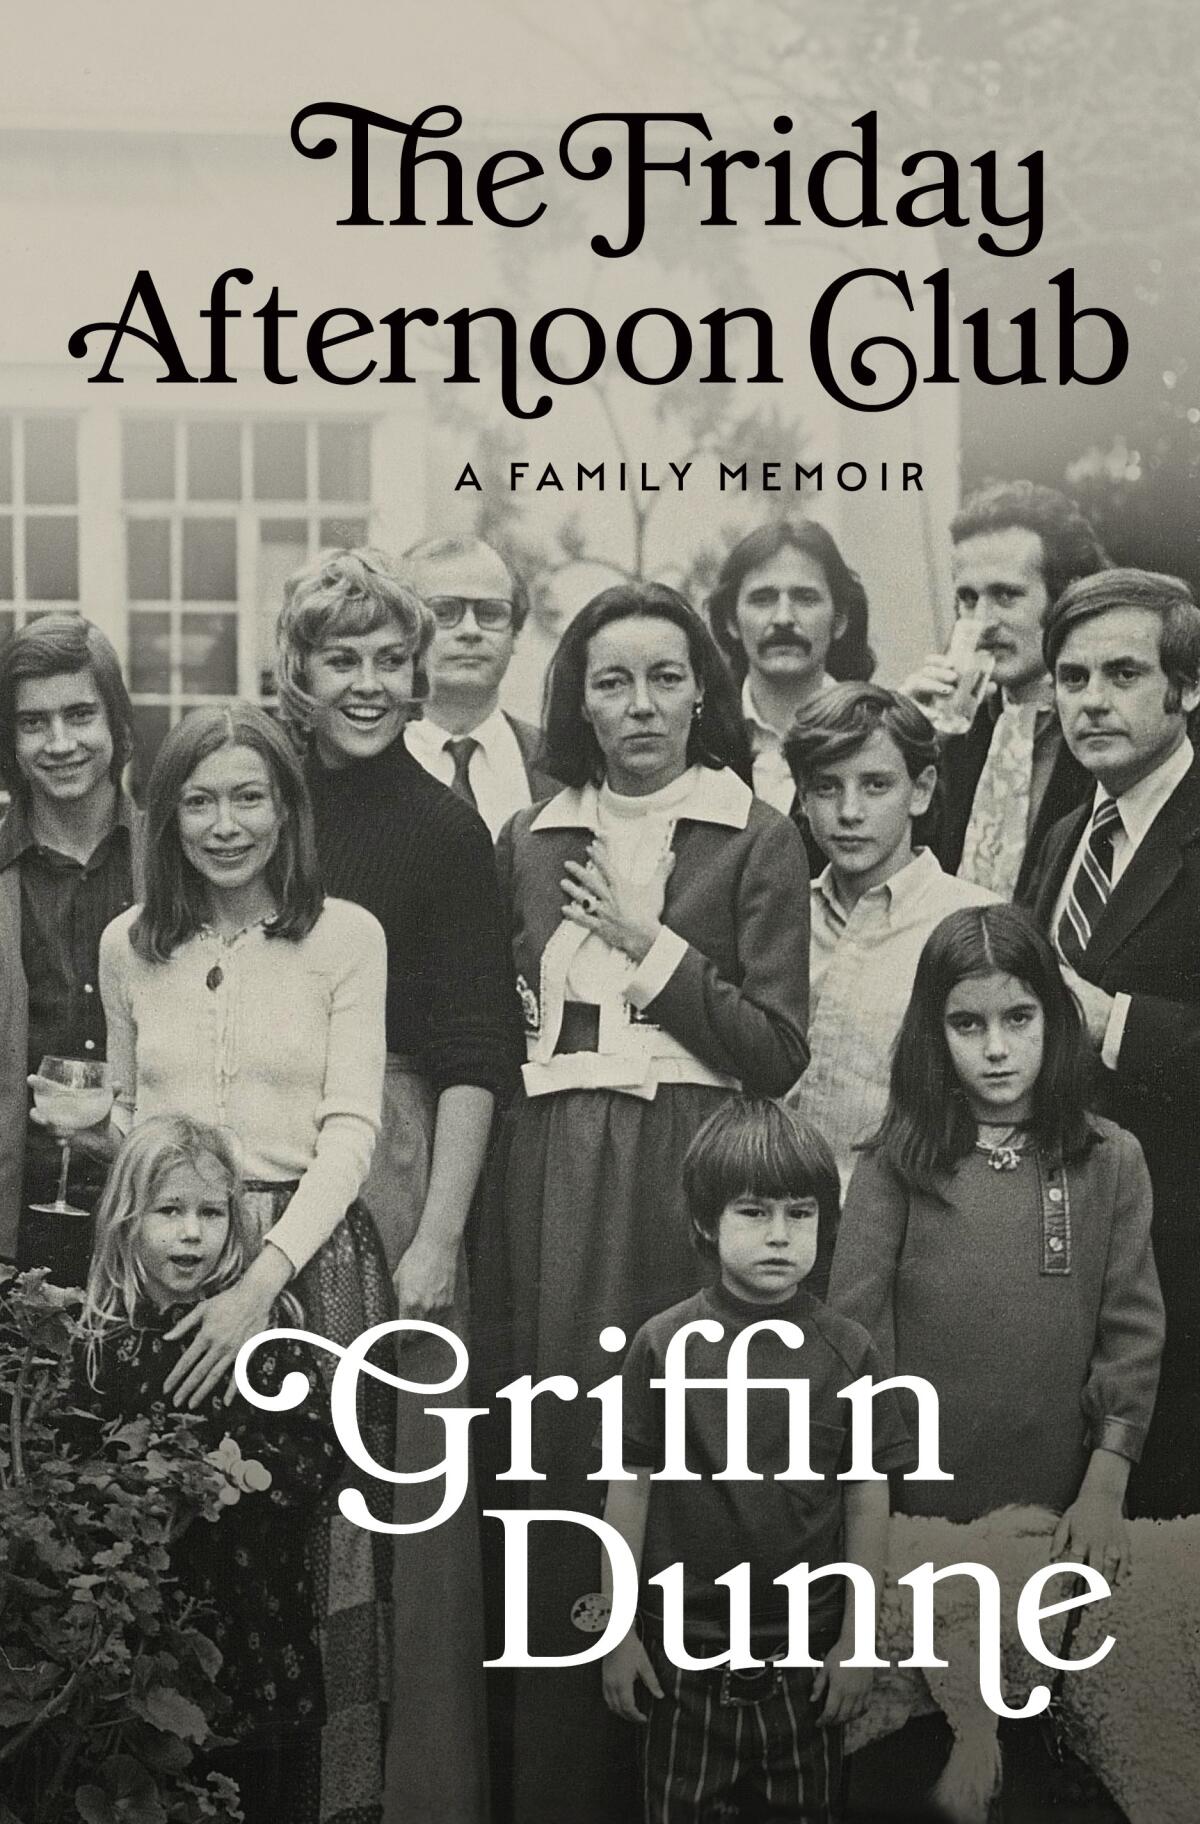 "The Friday Afternoon Club: A Family Memoir" book jacket shows 12 people of various ages standing for a black-and-white photo